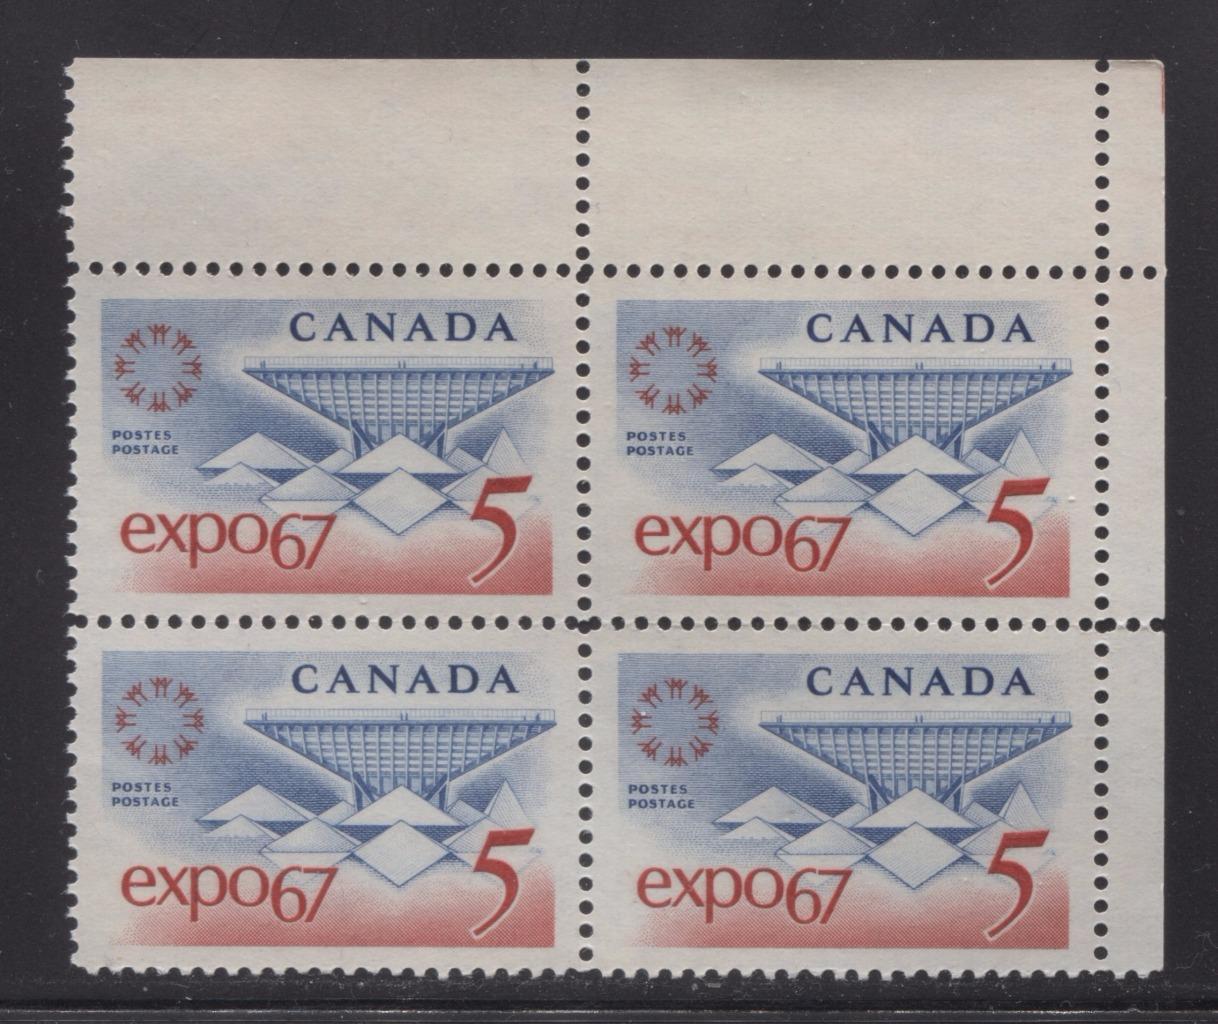 Canada #469 (SG#611) 5c Blue and Red Expo 67 DF IV Ribbed Paper Streaky Gum UR Block VF-84 NH Brixton Chrome 